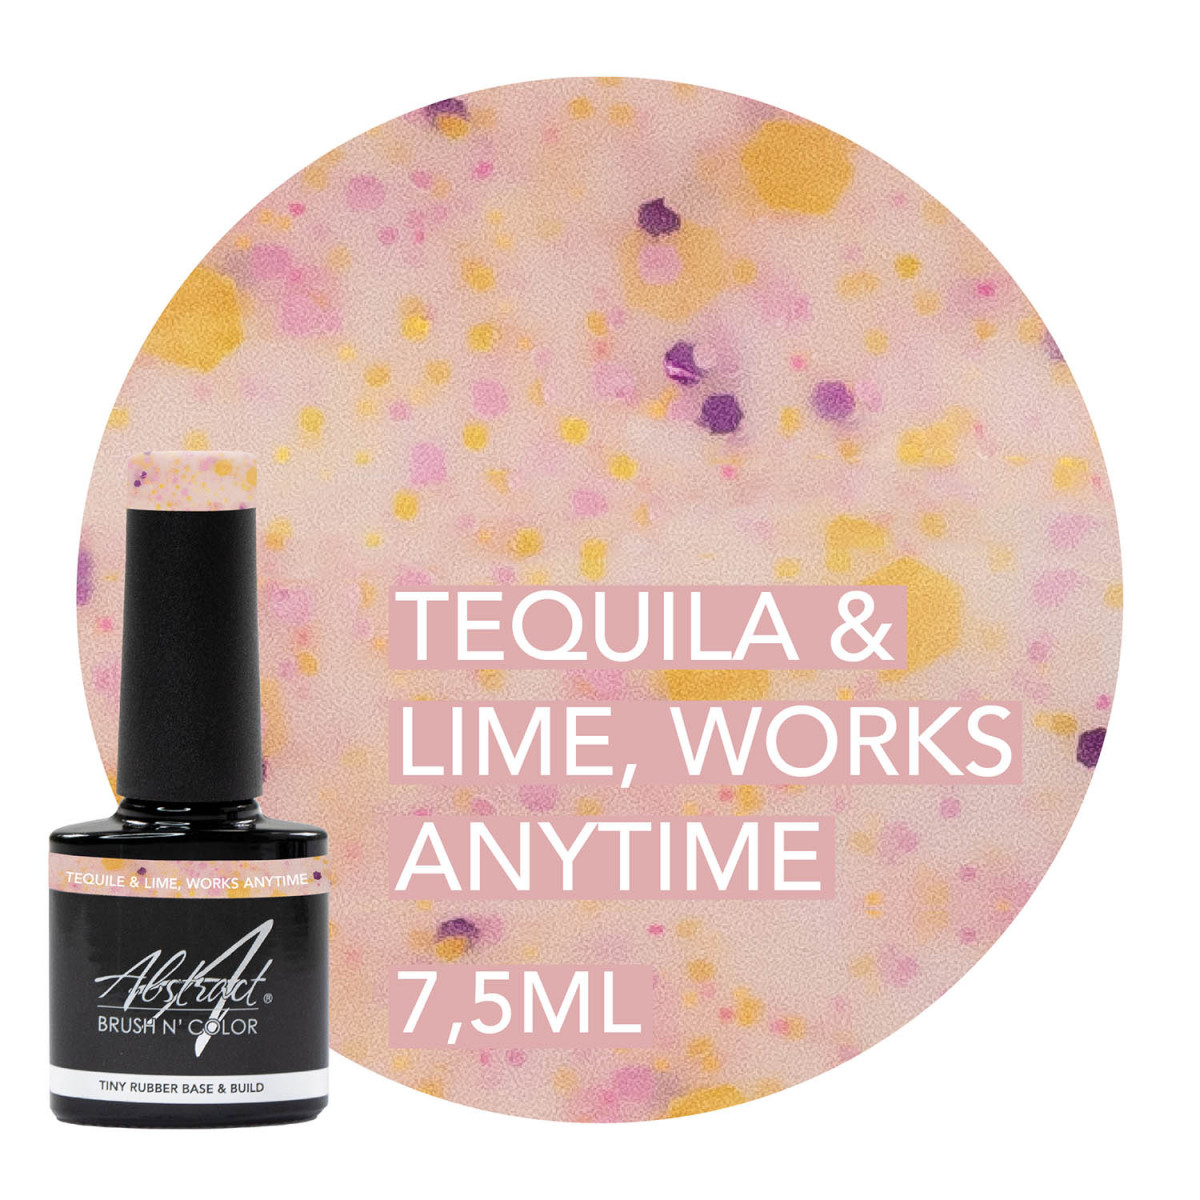 PRE-COMMANDE Tequila and Lime works anytime - TINY Rubber Base & Build Gel Abstract